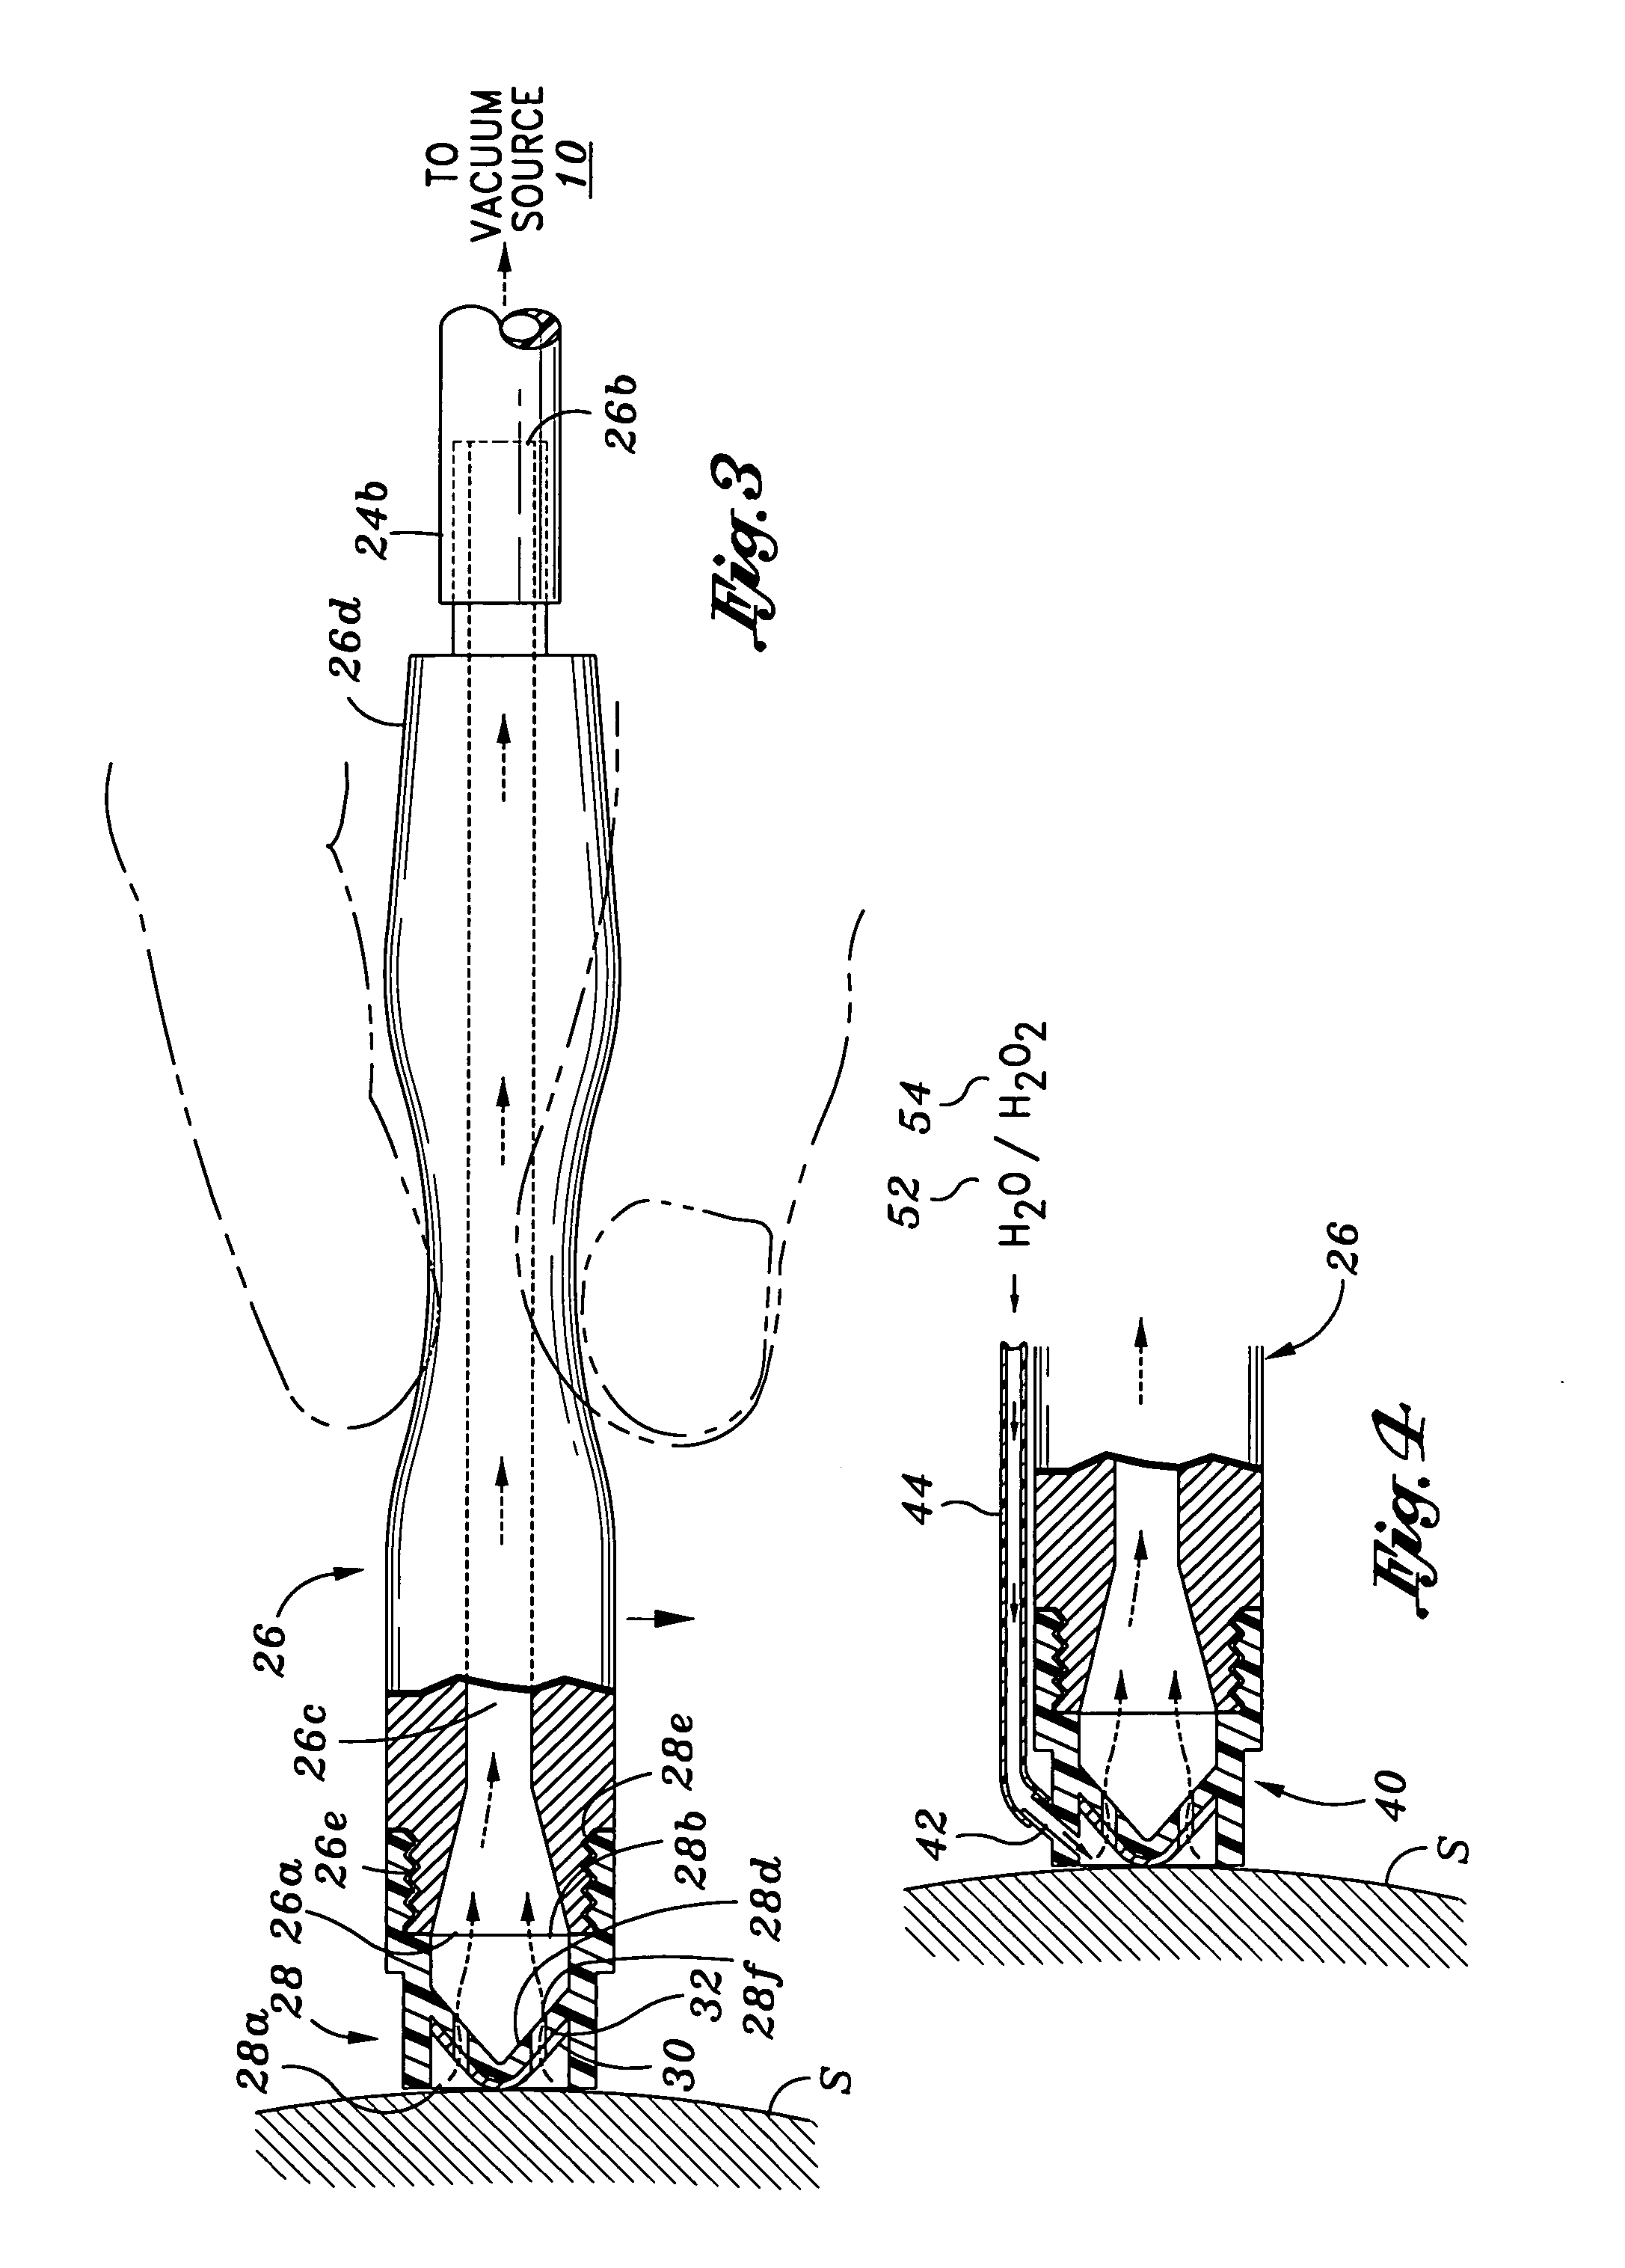 Hydro-dermabrasion apparatus and method of use